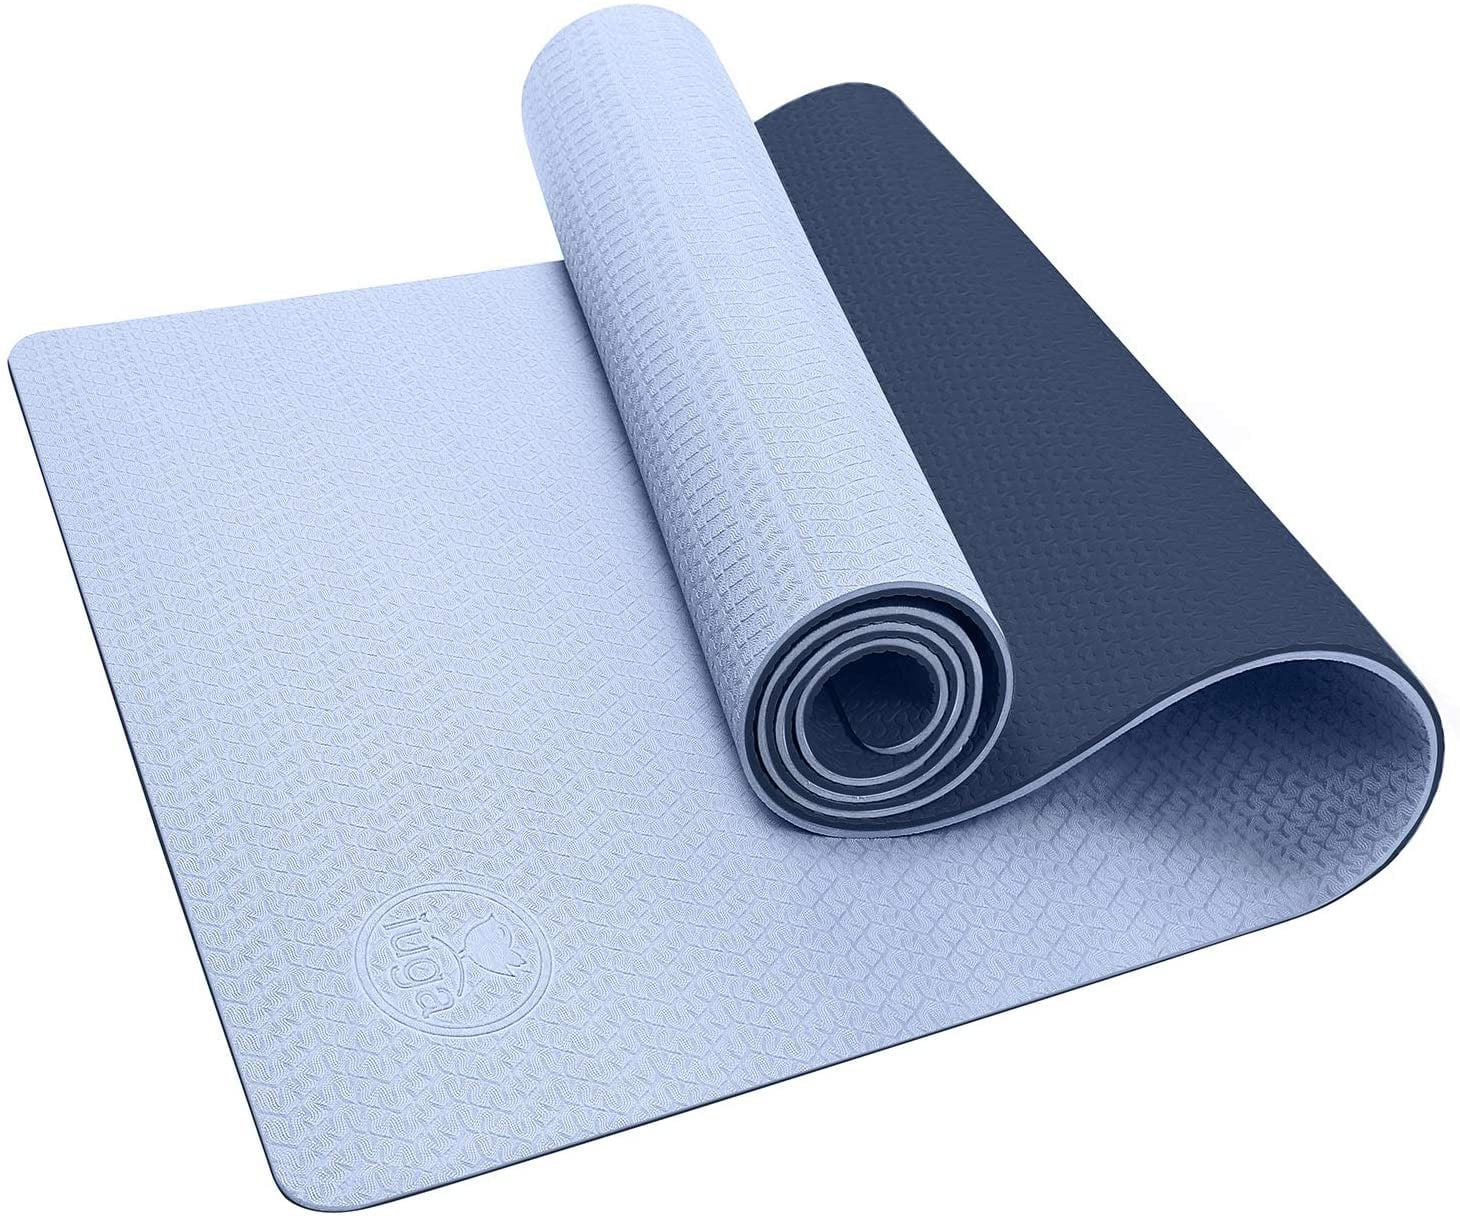 Iuga Yoga Mat   Prime Day Is a Haven For All the Health and